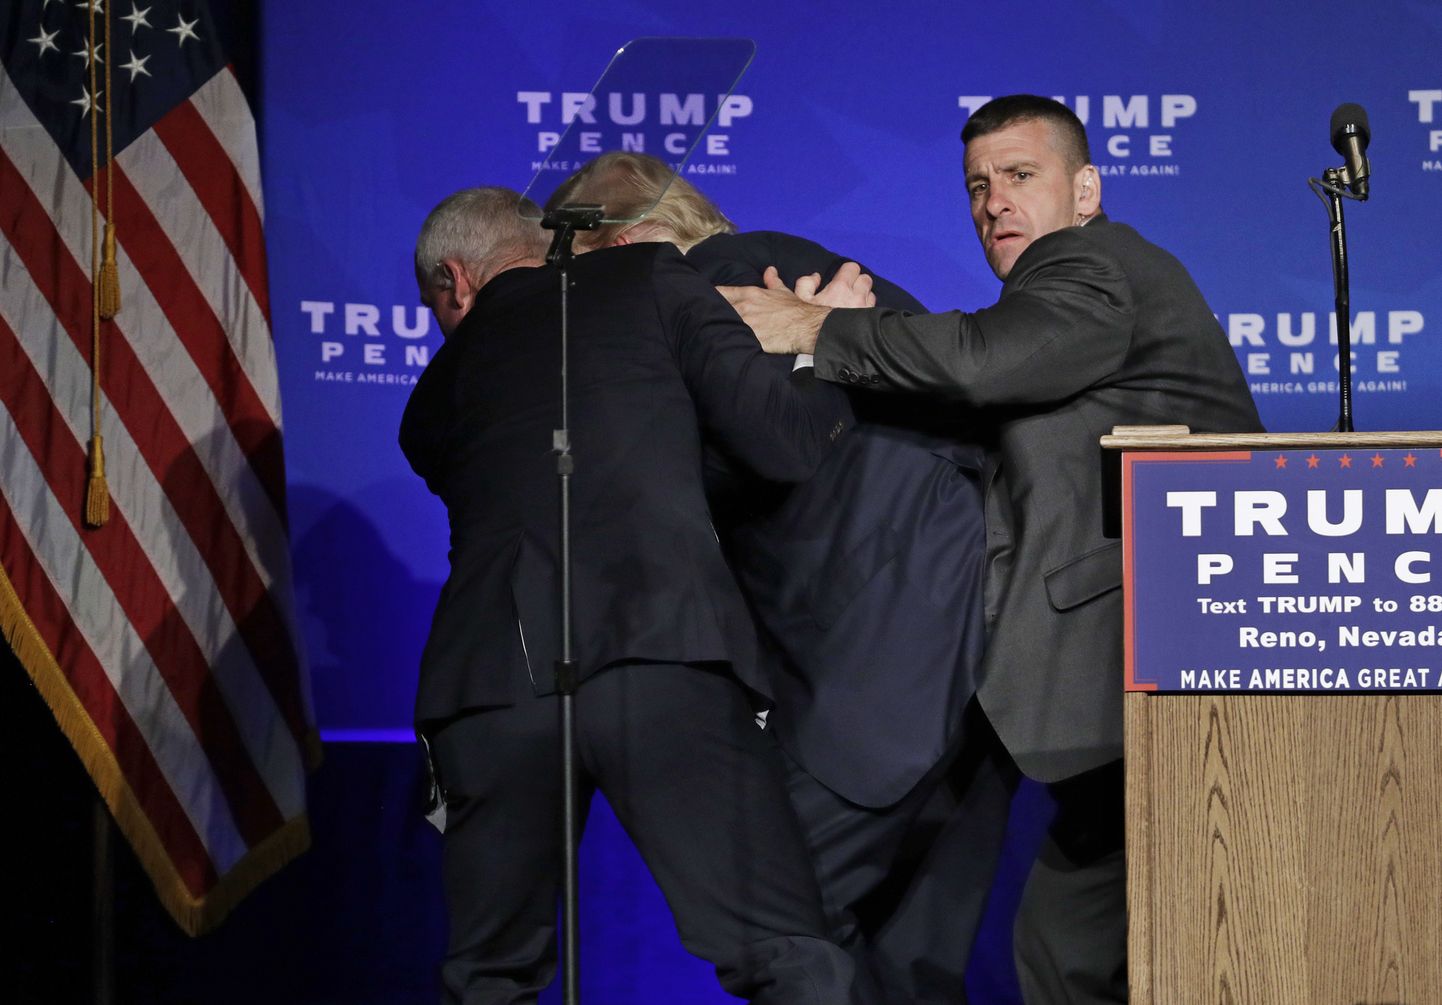 Secret Service agents rush Republican presidential candidate Donald Trump off the stage at a campaign rally in Reno, Nev., on Saturday, Nov. 5, 2016. (AP Photo/John Locher)